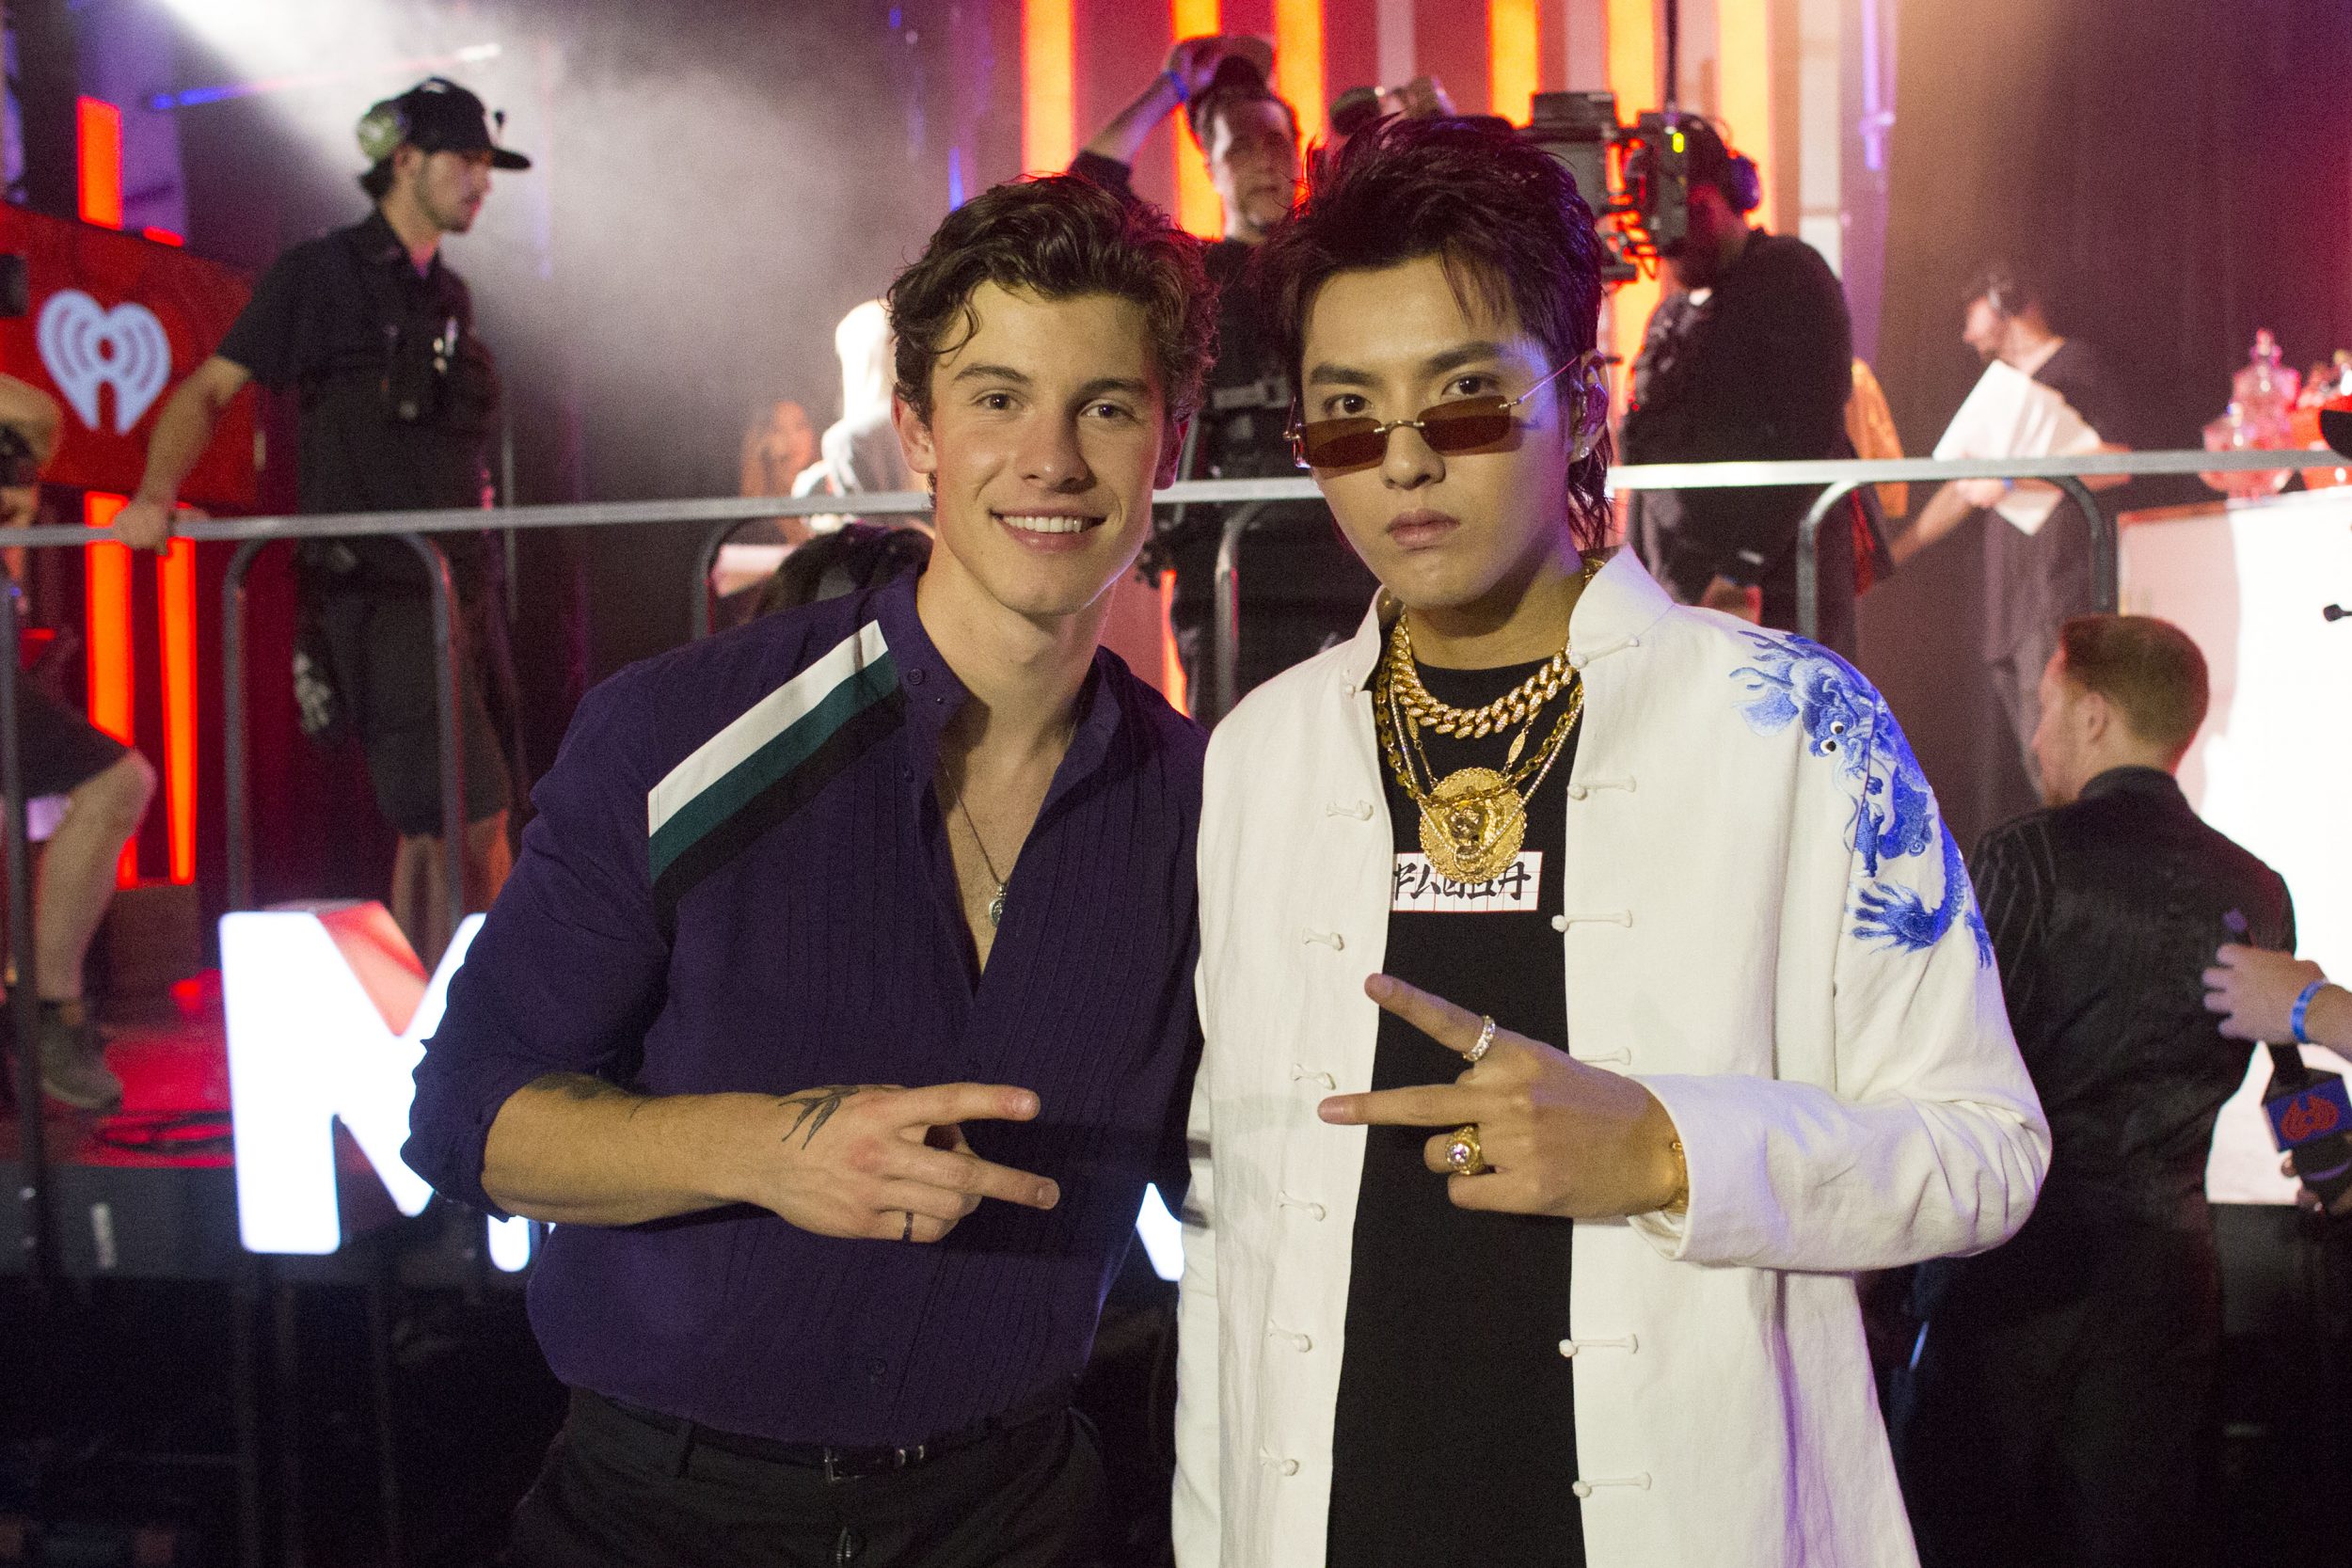 Backstage Look: Shawn Mendes Poses With Kris Wu, JWoww, Kristin